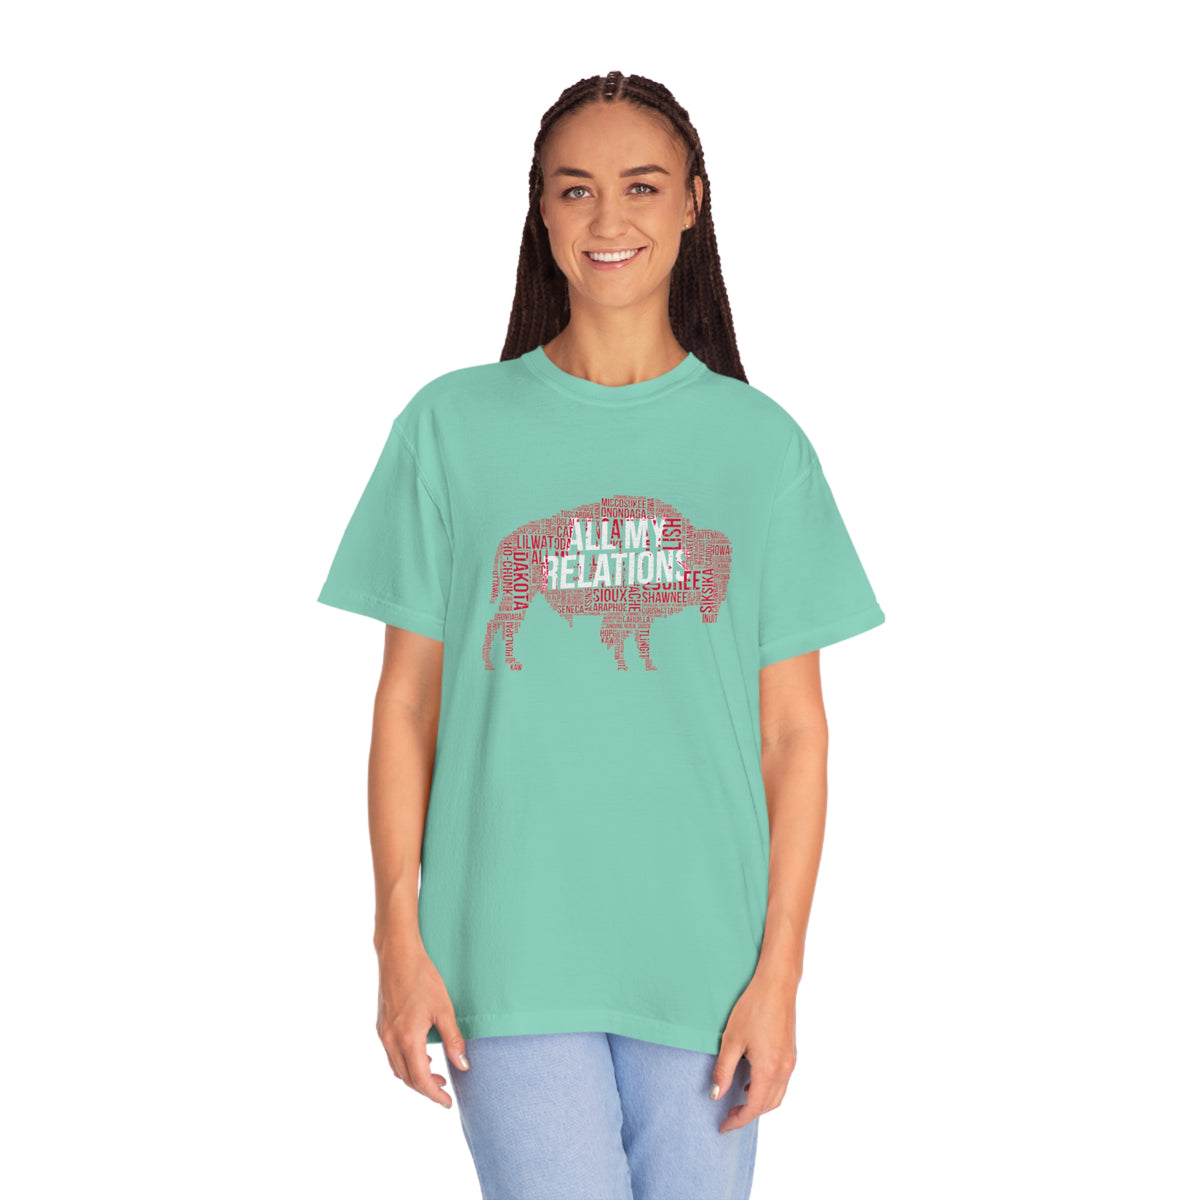 Buffalo All My Relations T-Shirt - Comfort Colors